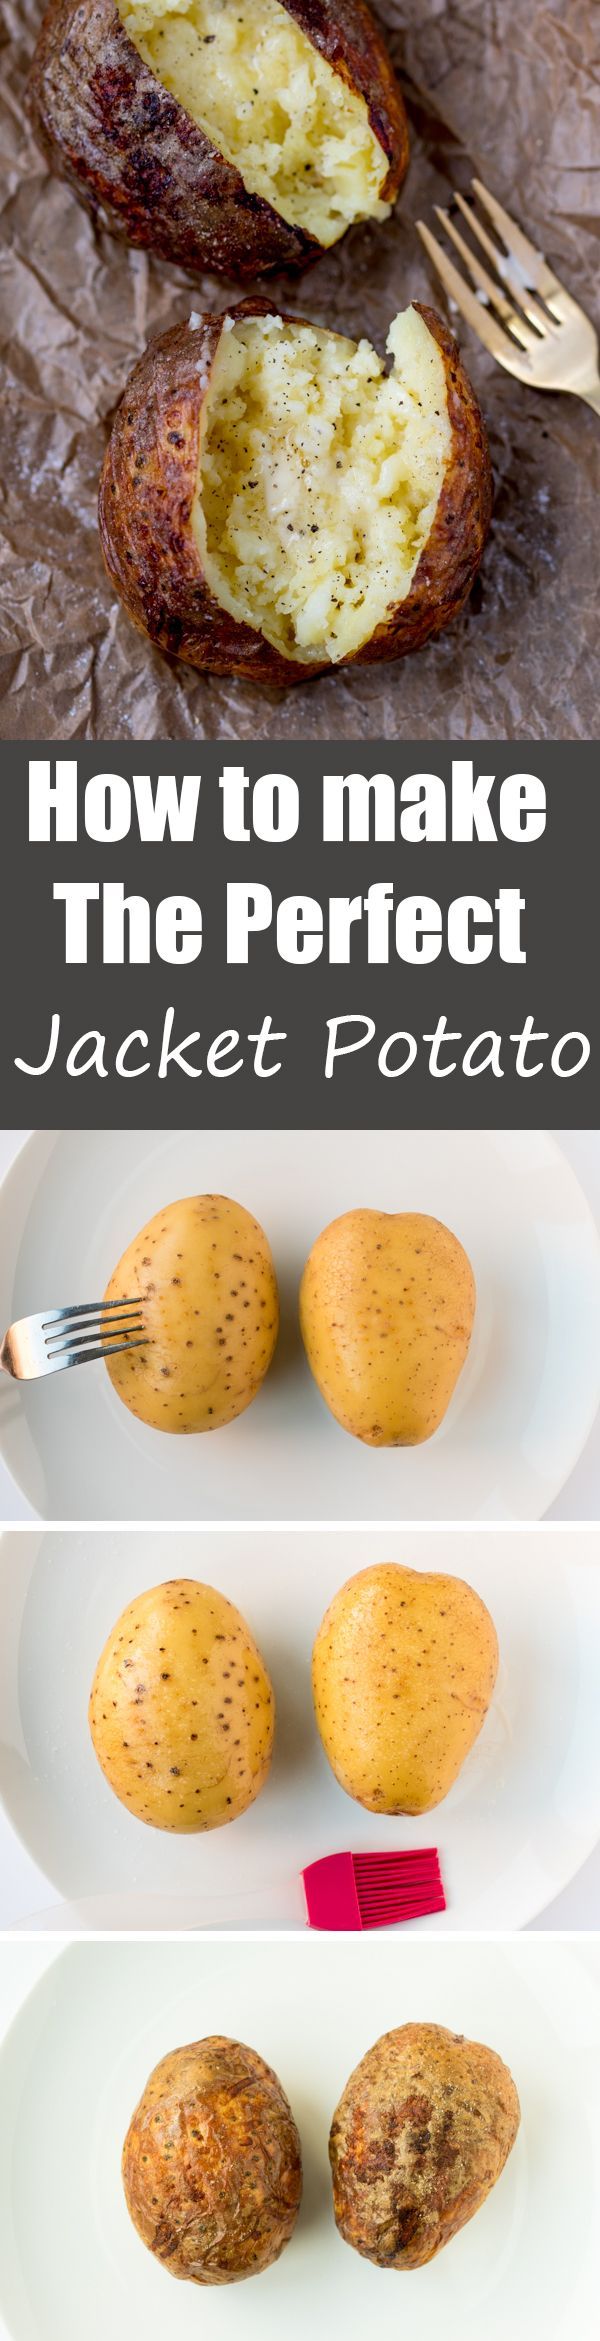 HOW TO MAKE a BAKED POTATO – crunchy, crisp skin with a light and fluffy interior – add plenty of butter for the perfect jacket